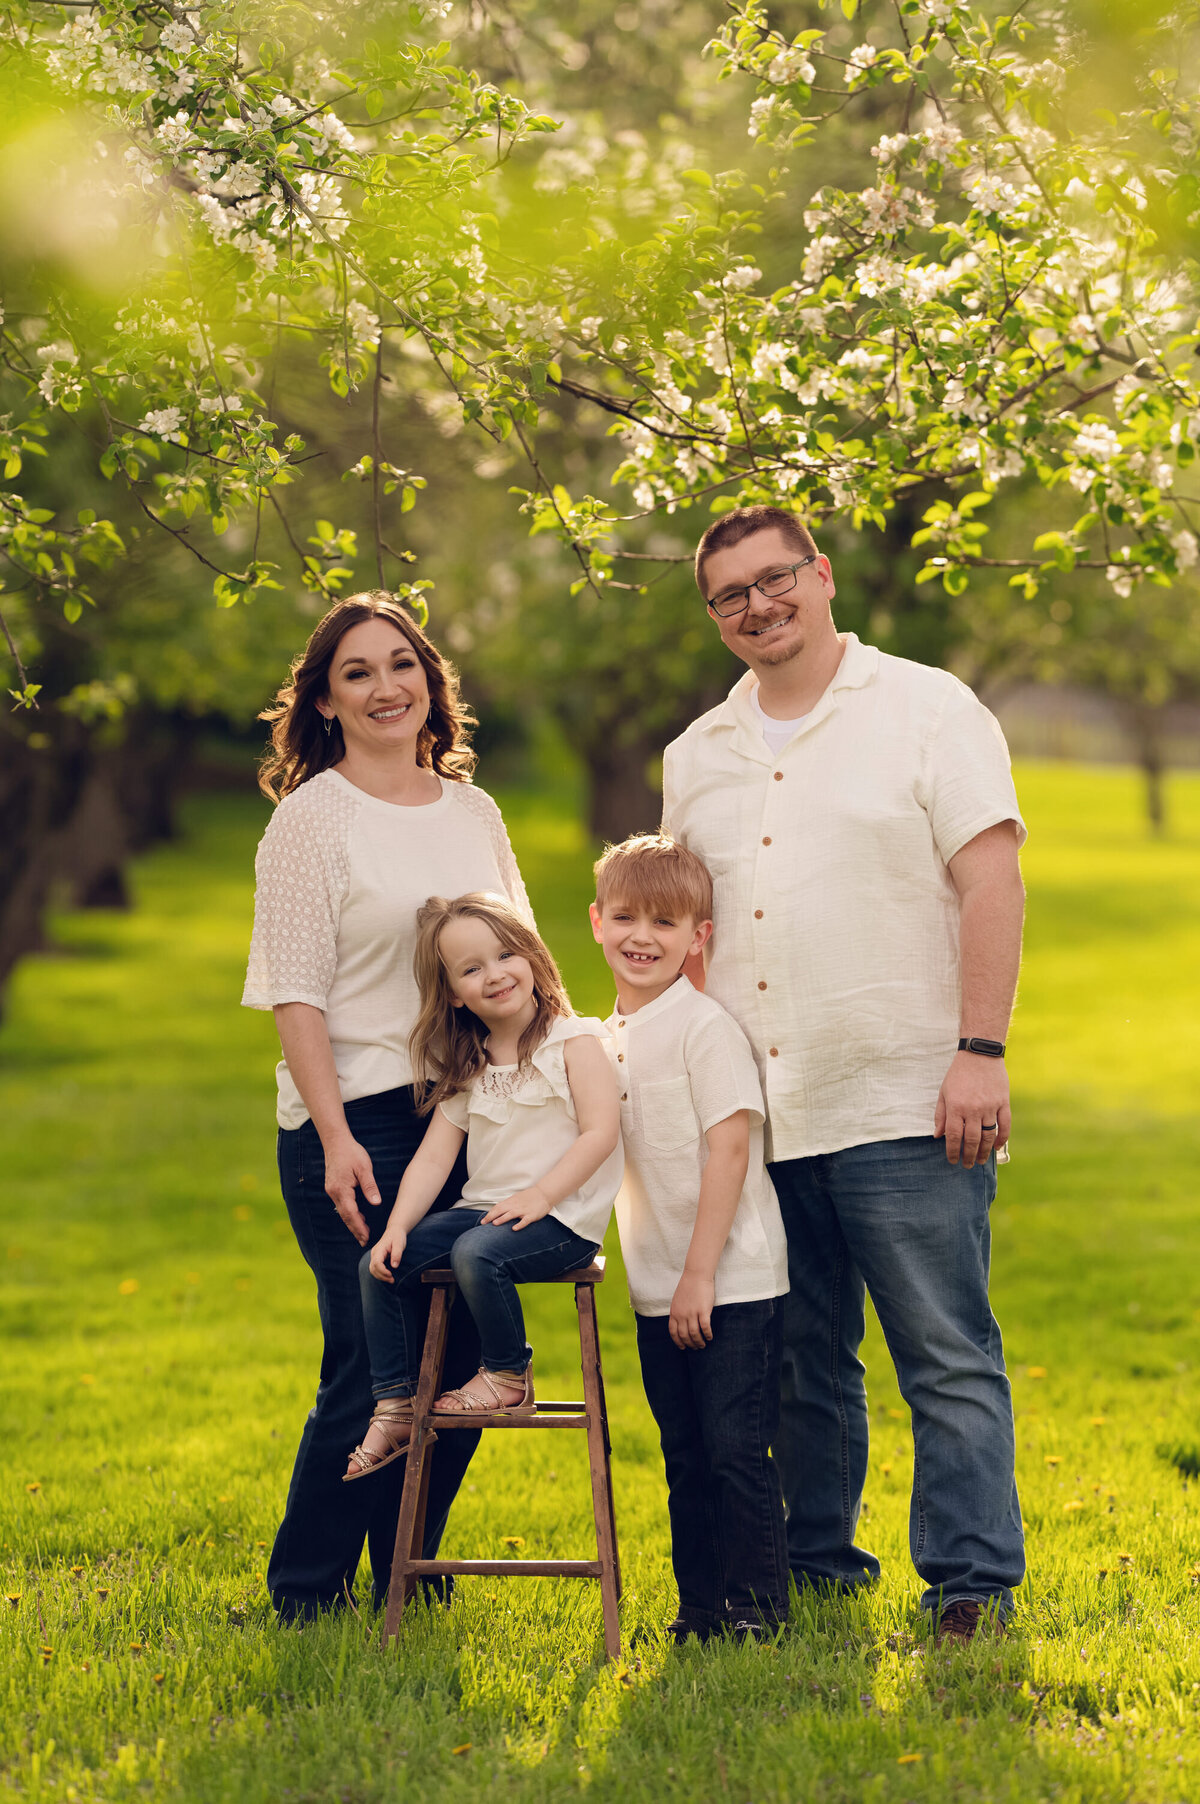 A Pewaukee family of four wears jeans and while tops for their apple orchard portraits.